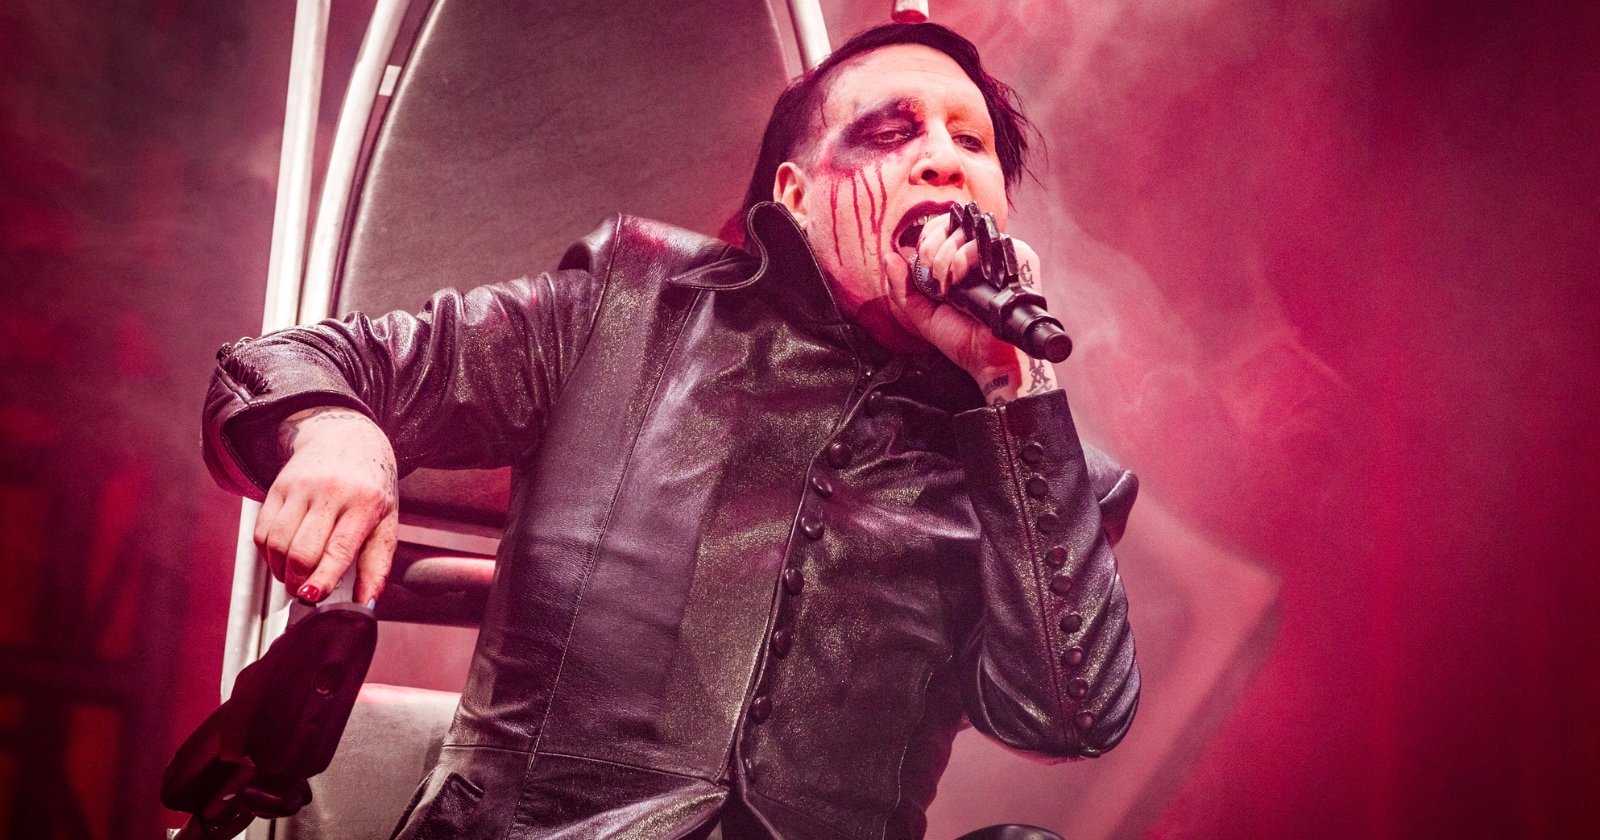  camerawoman sues marilyn manson spitting blowing 